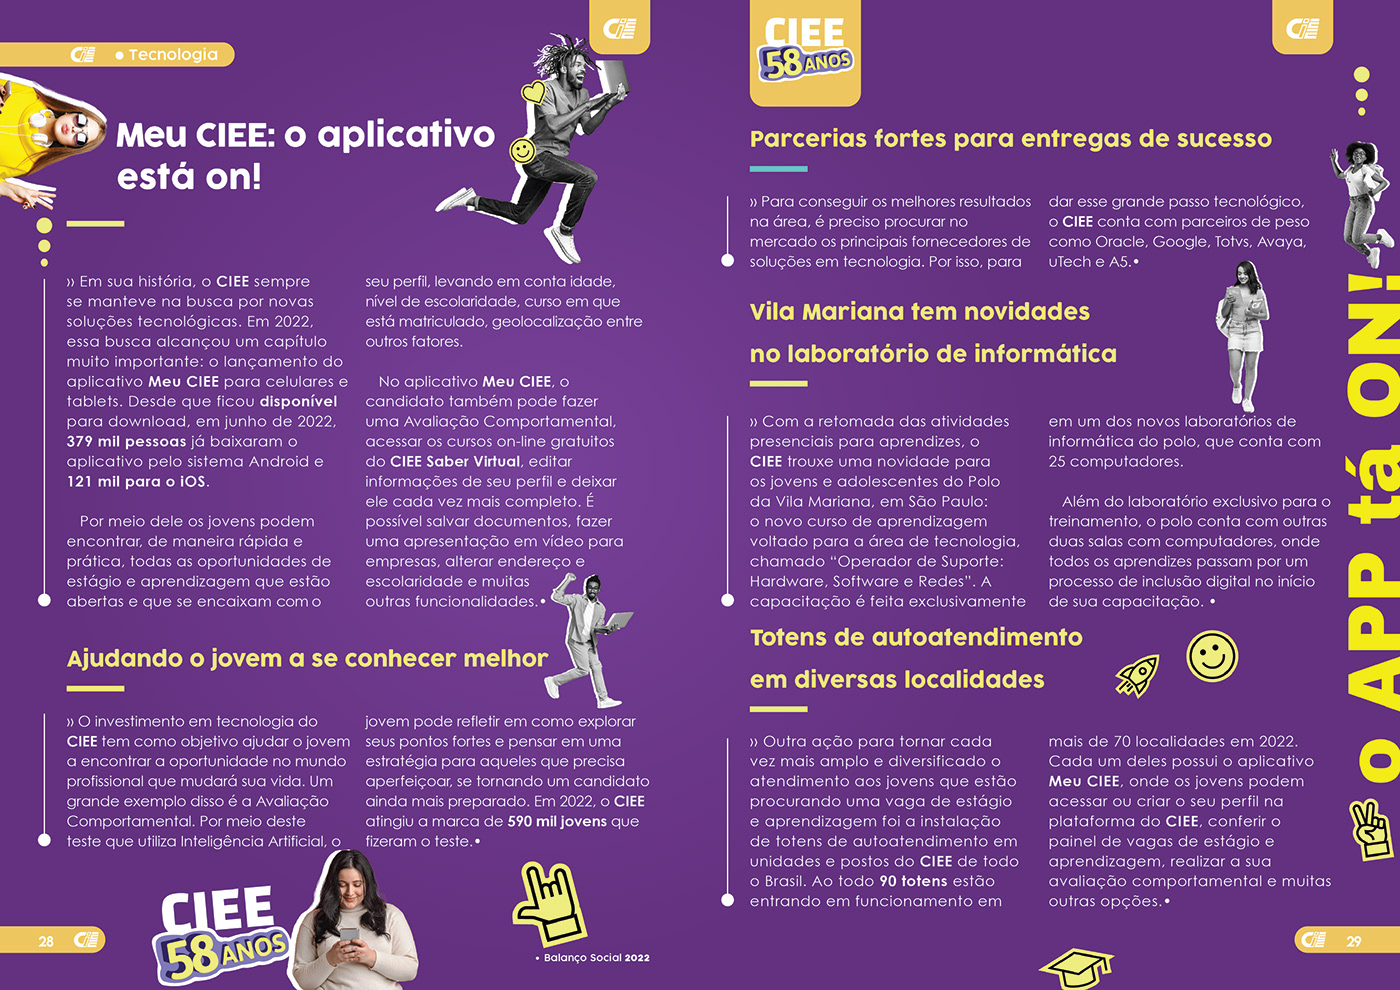 Diversity editorial editorial design  magazine CIEE collage design gráfico Social media post student Better.png